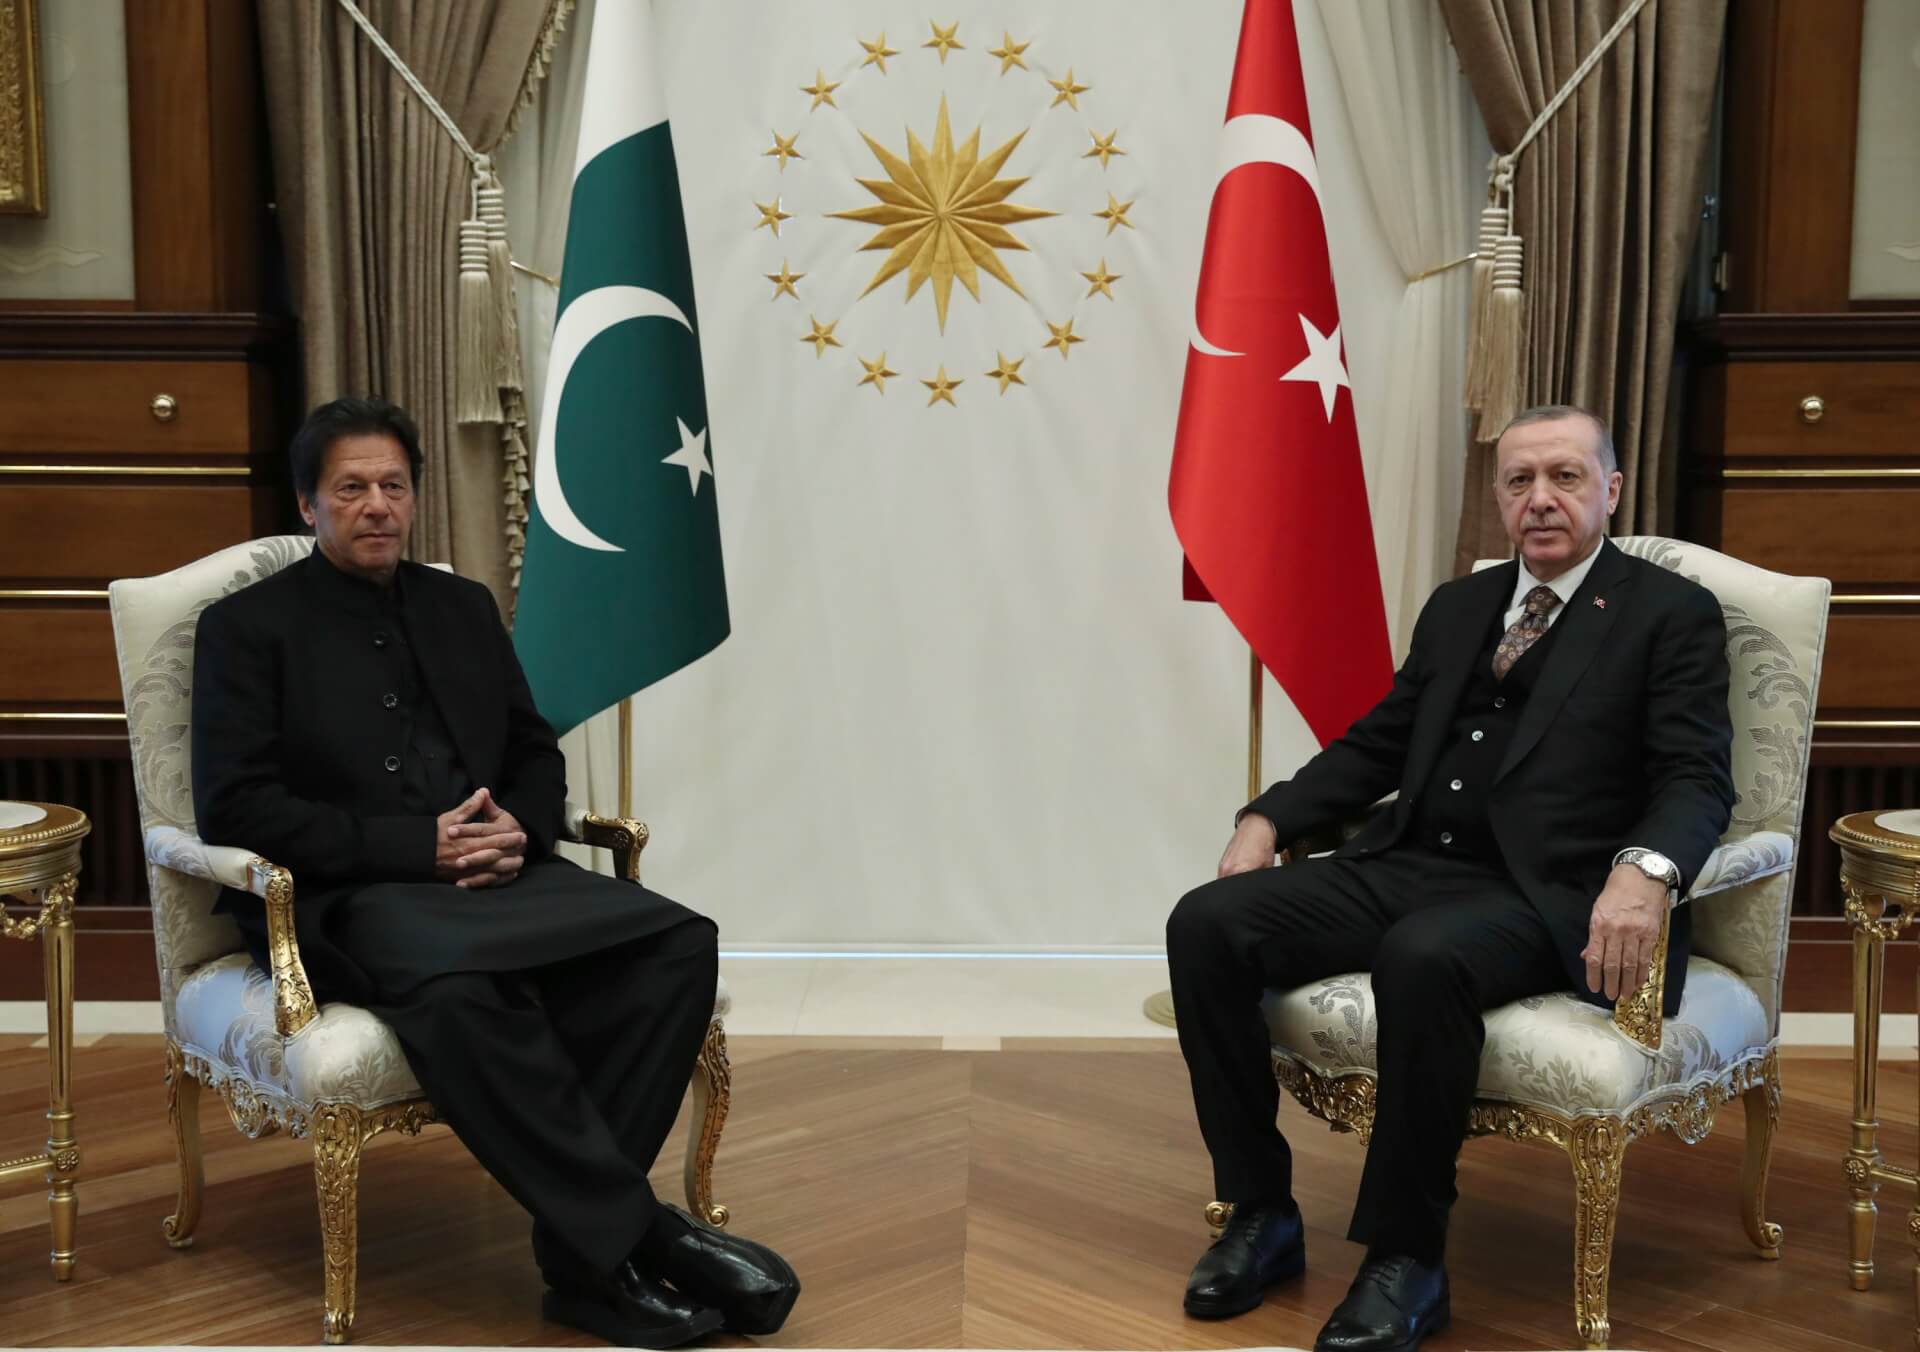 Turkish President Extends Support to Pakistan Over Kashmir Issue